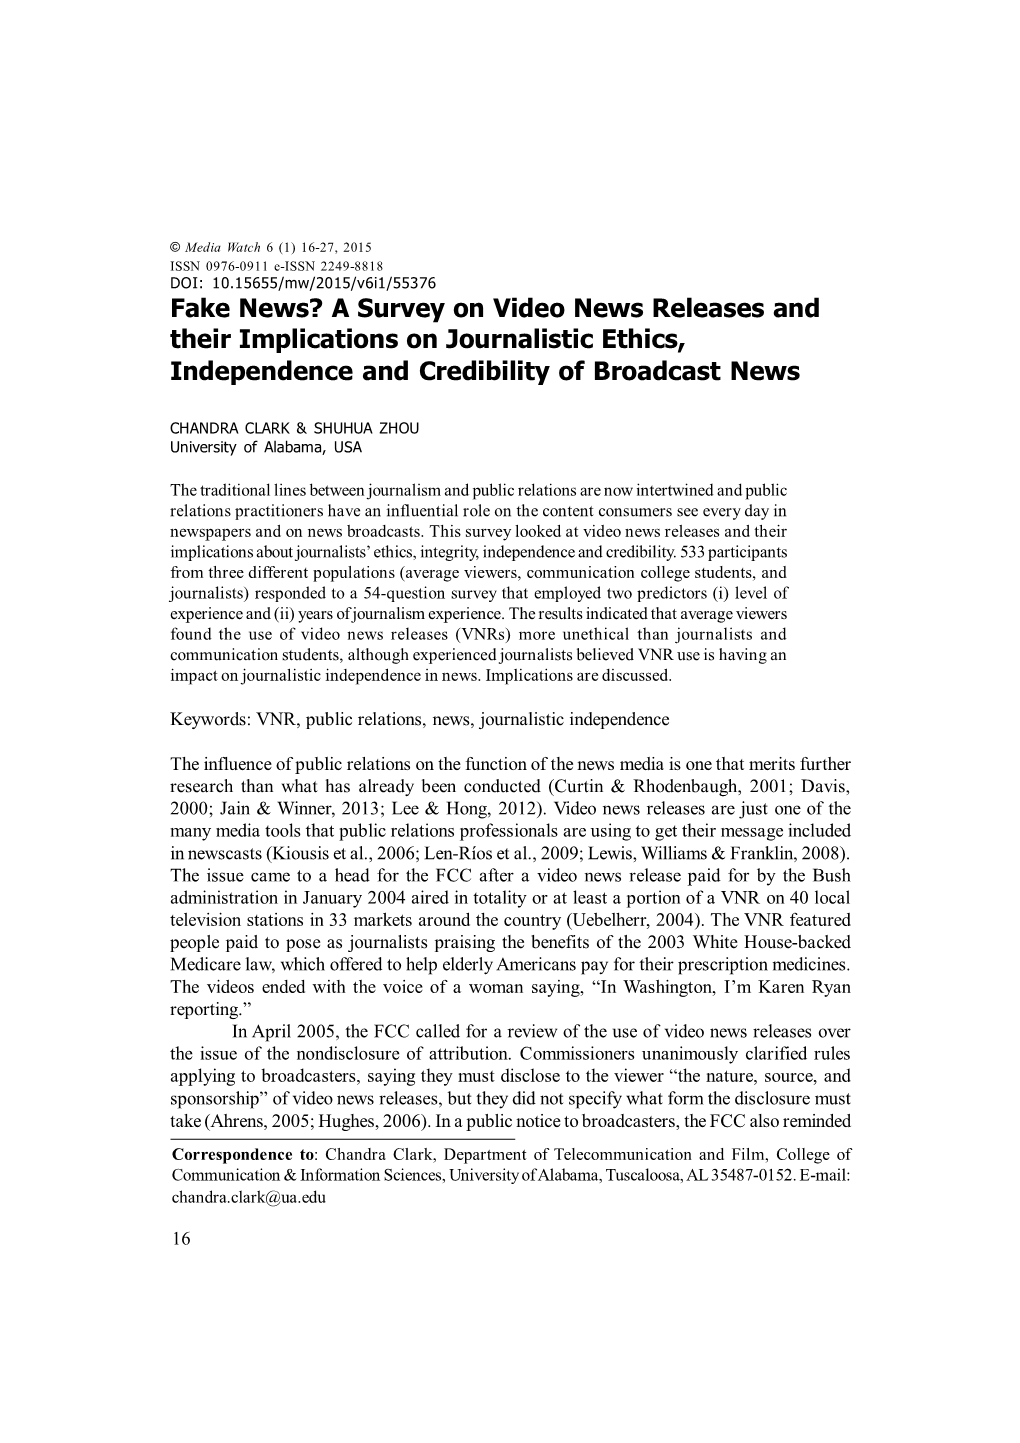 Fake News? a Survey on Video News Releases and Their Implications on Journalistic Ethics, Independence and Credibility of Broadcast News